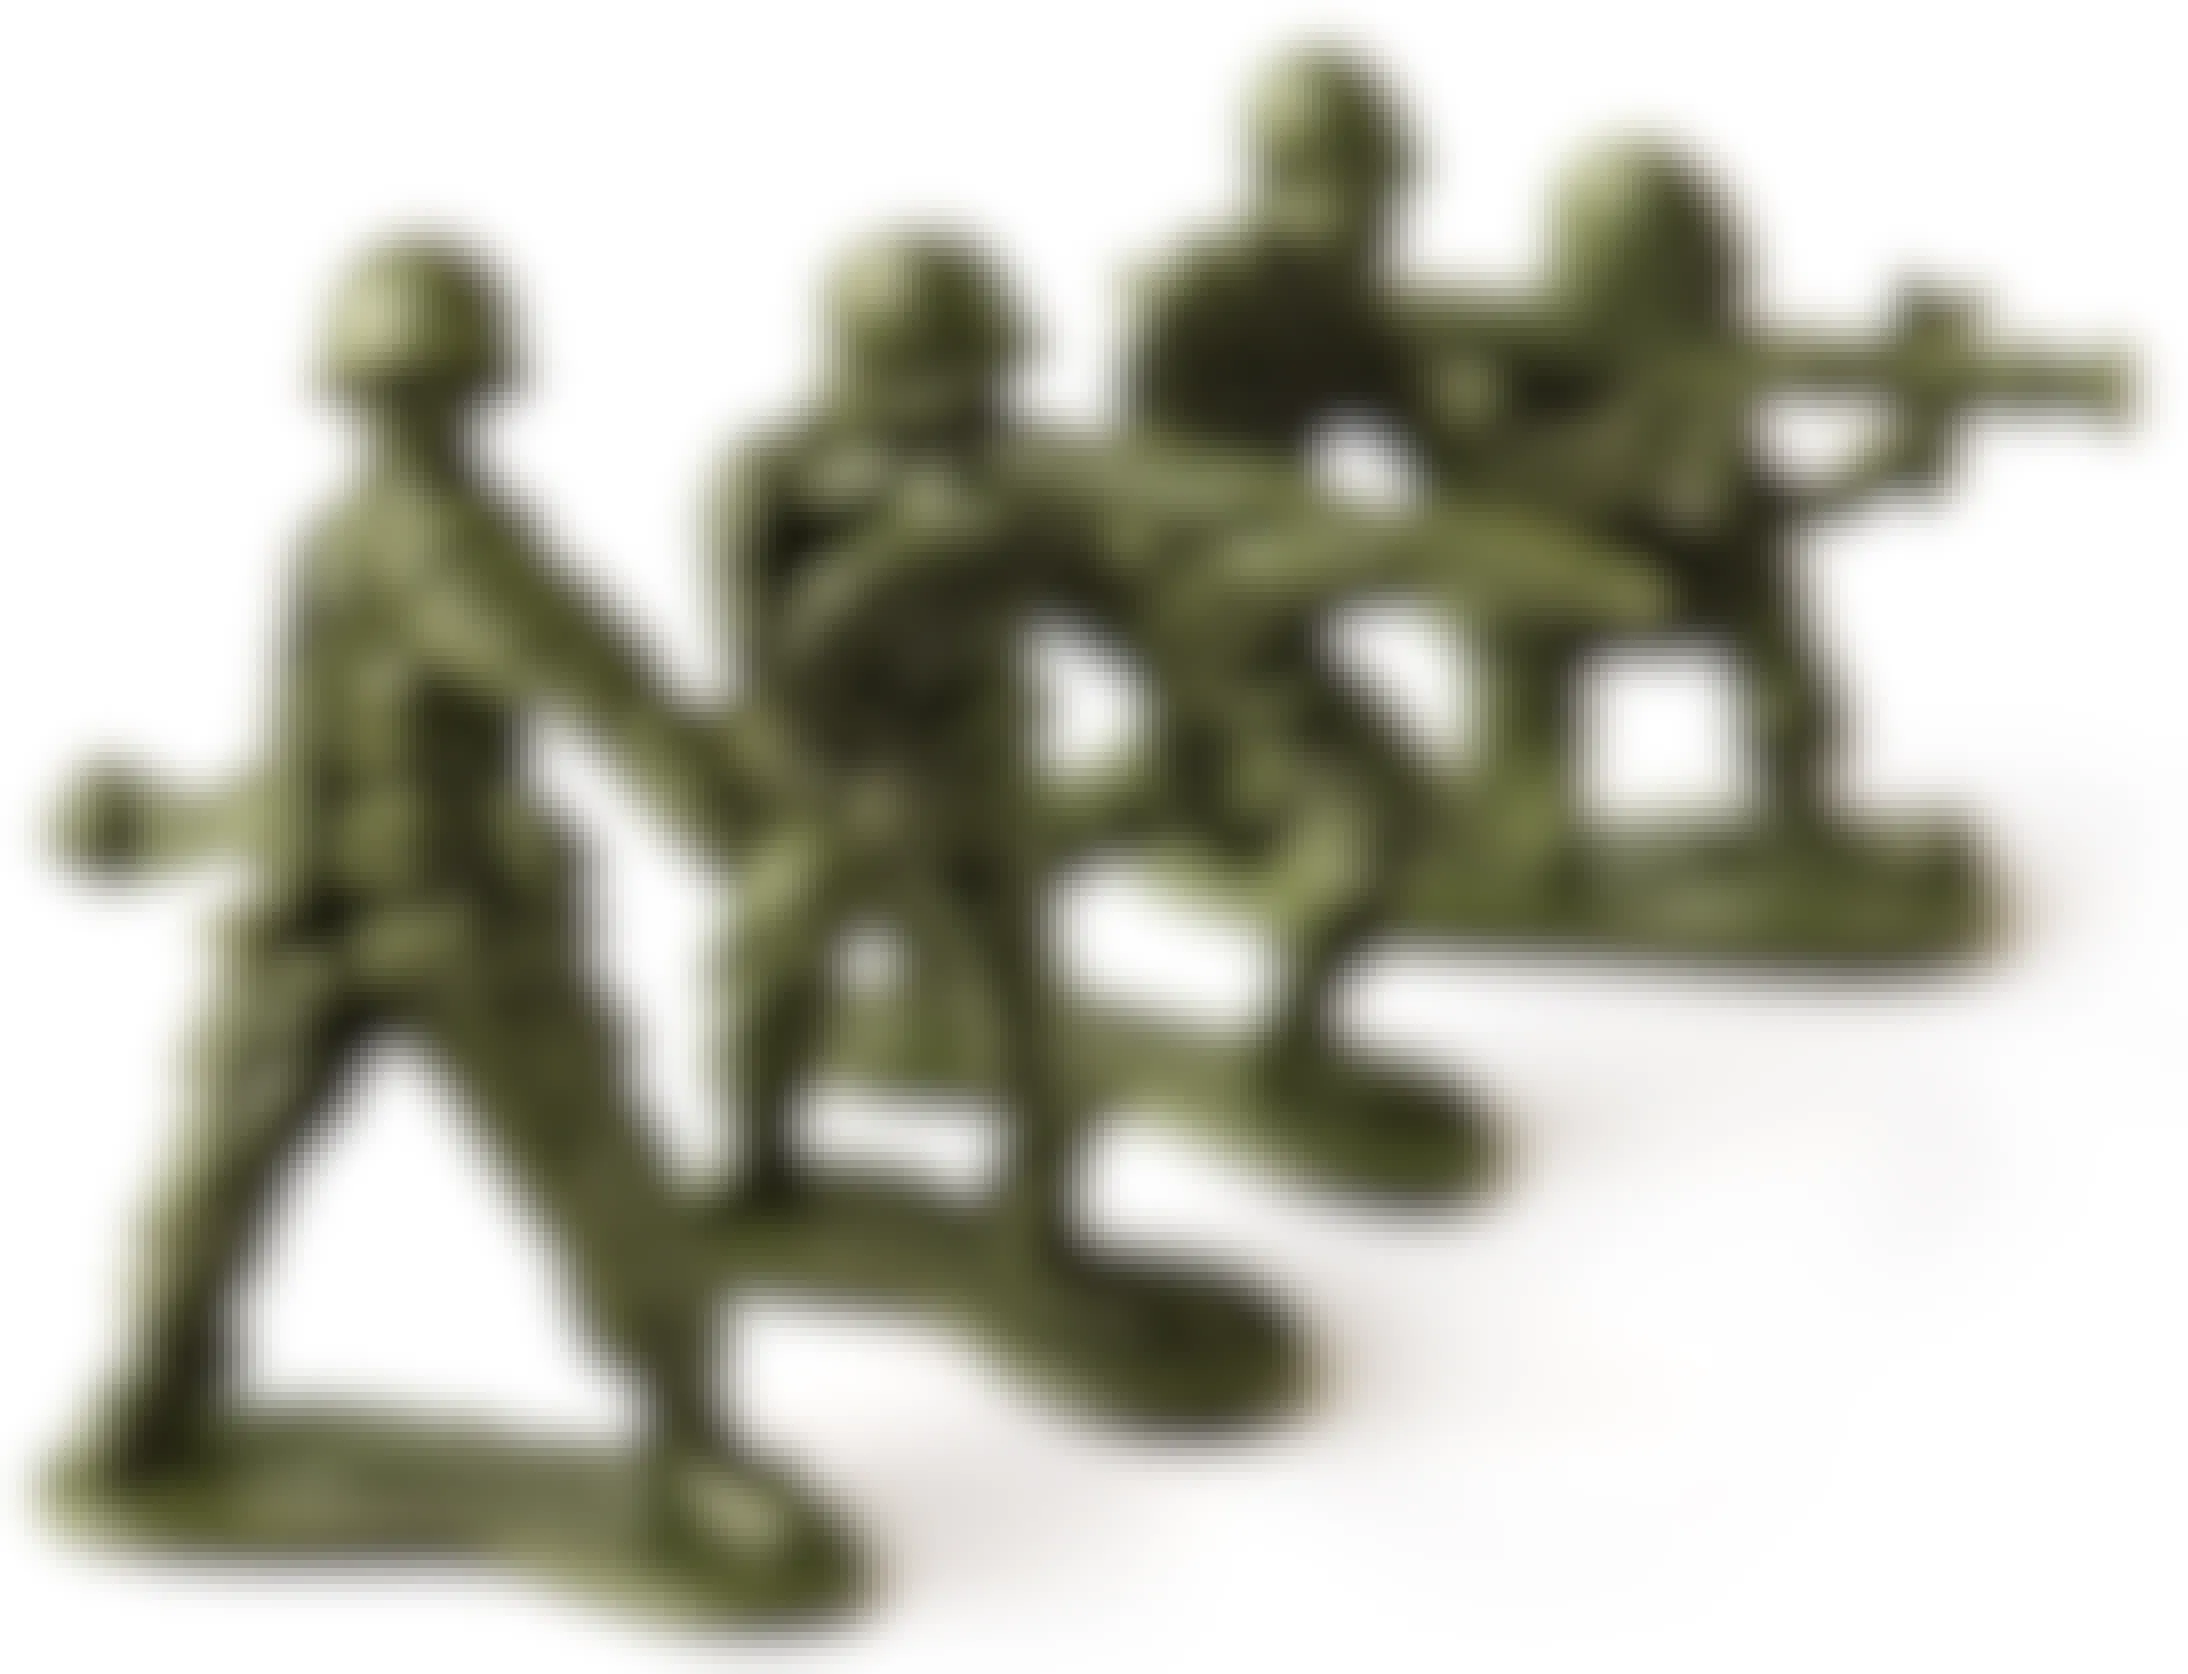 Four green plastic army soldiers set up on a white background.